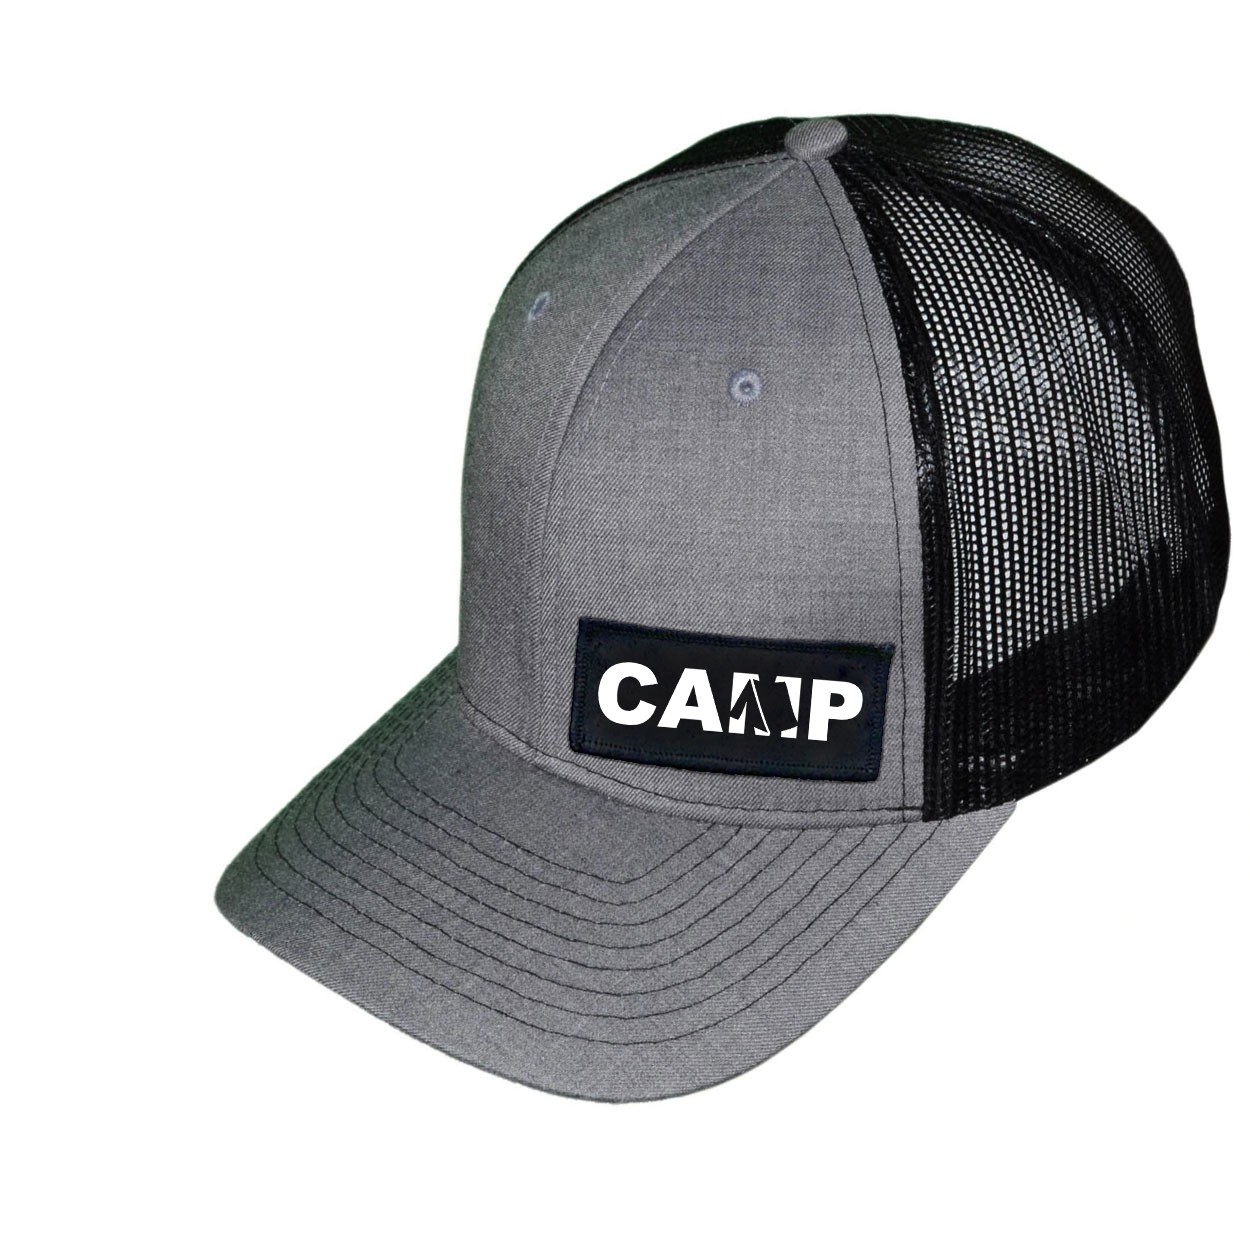 Camp Tent Logo Night Out Woven Patch Snapback Trucker Hat Heather Gray/Black (White Logo)